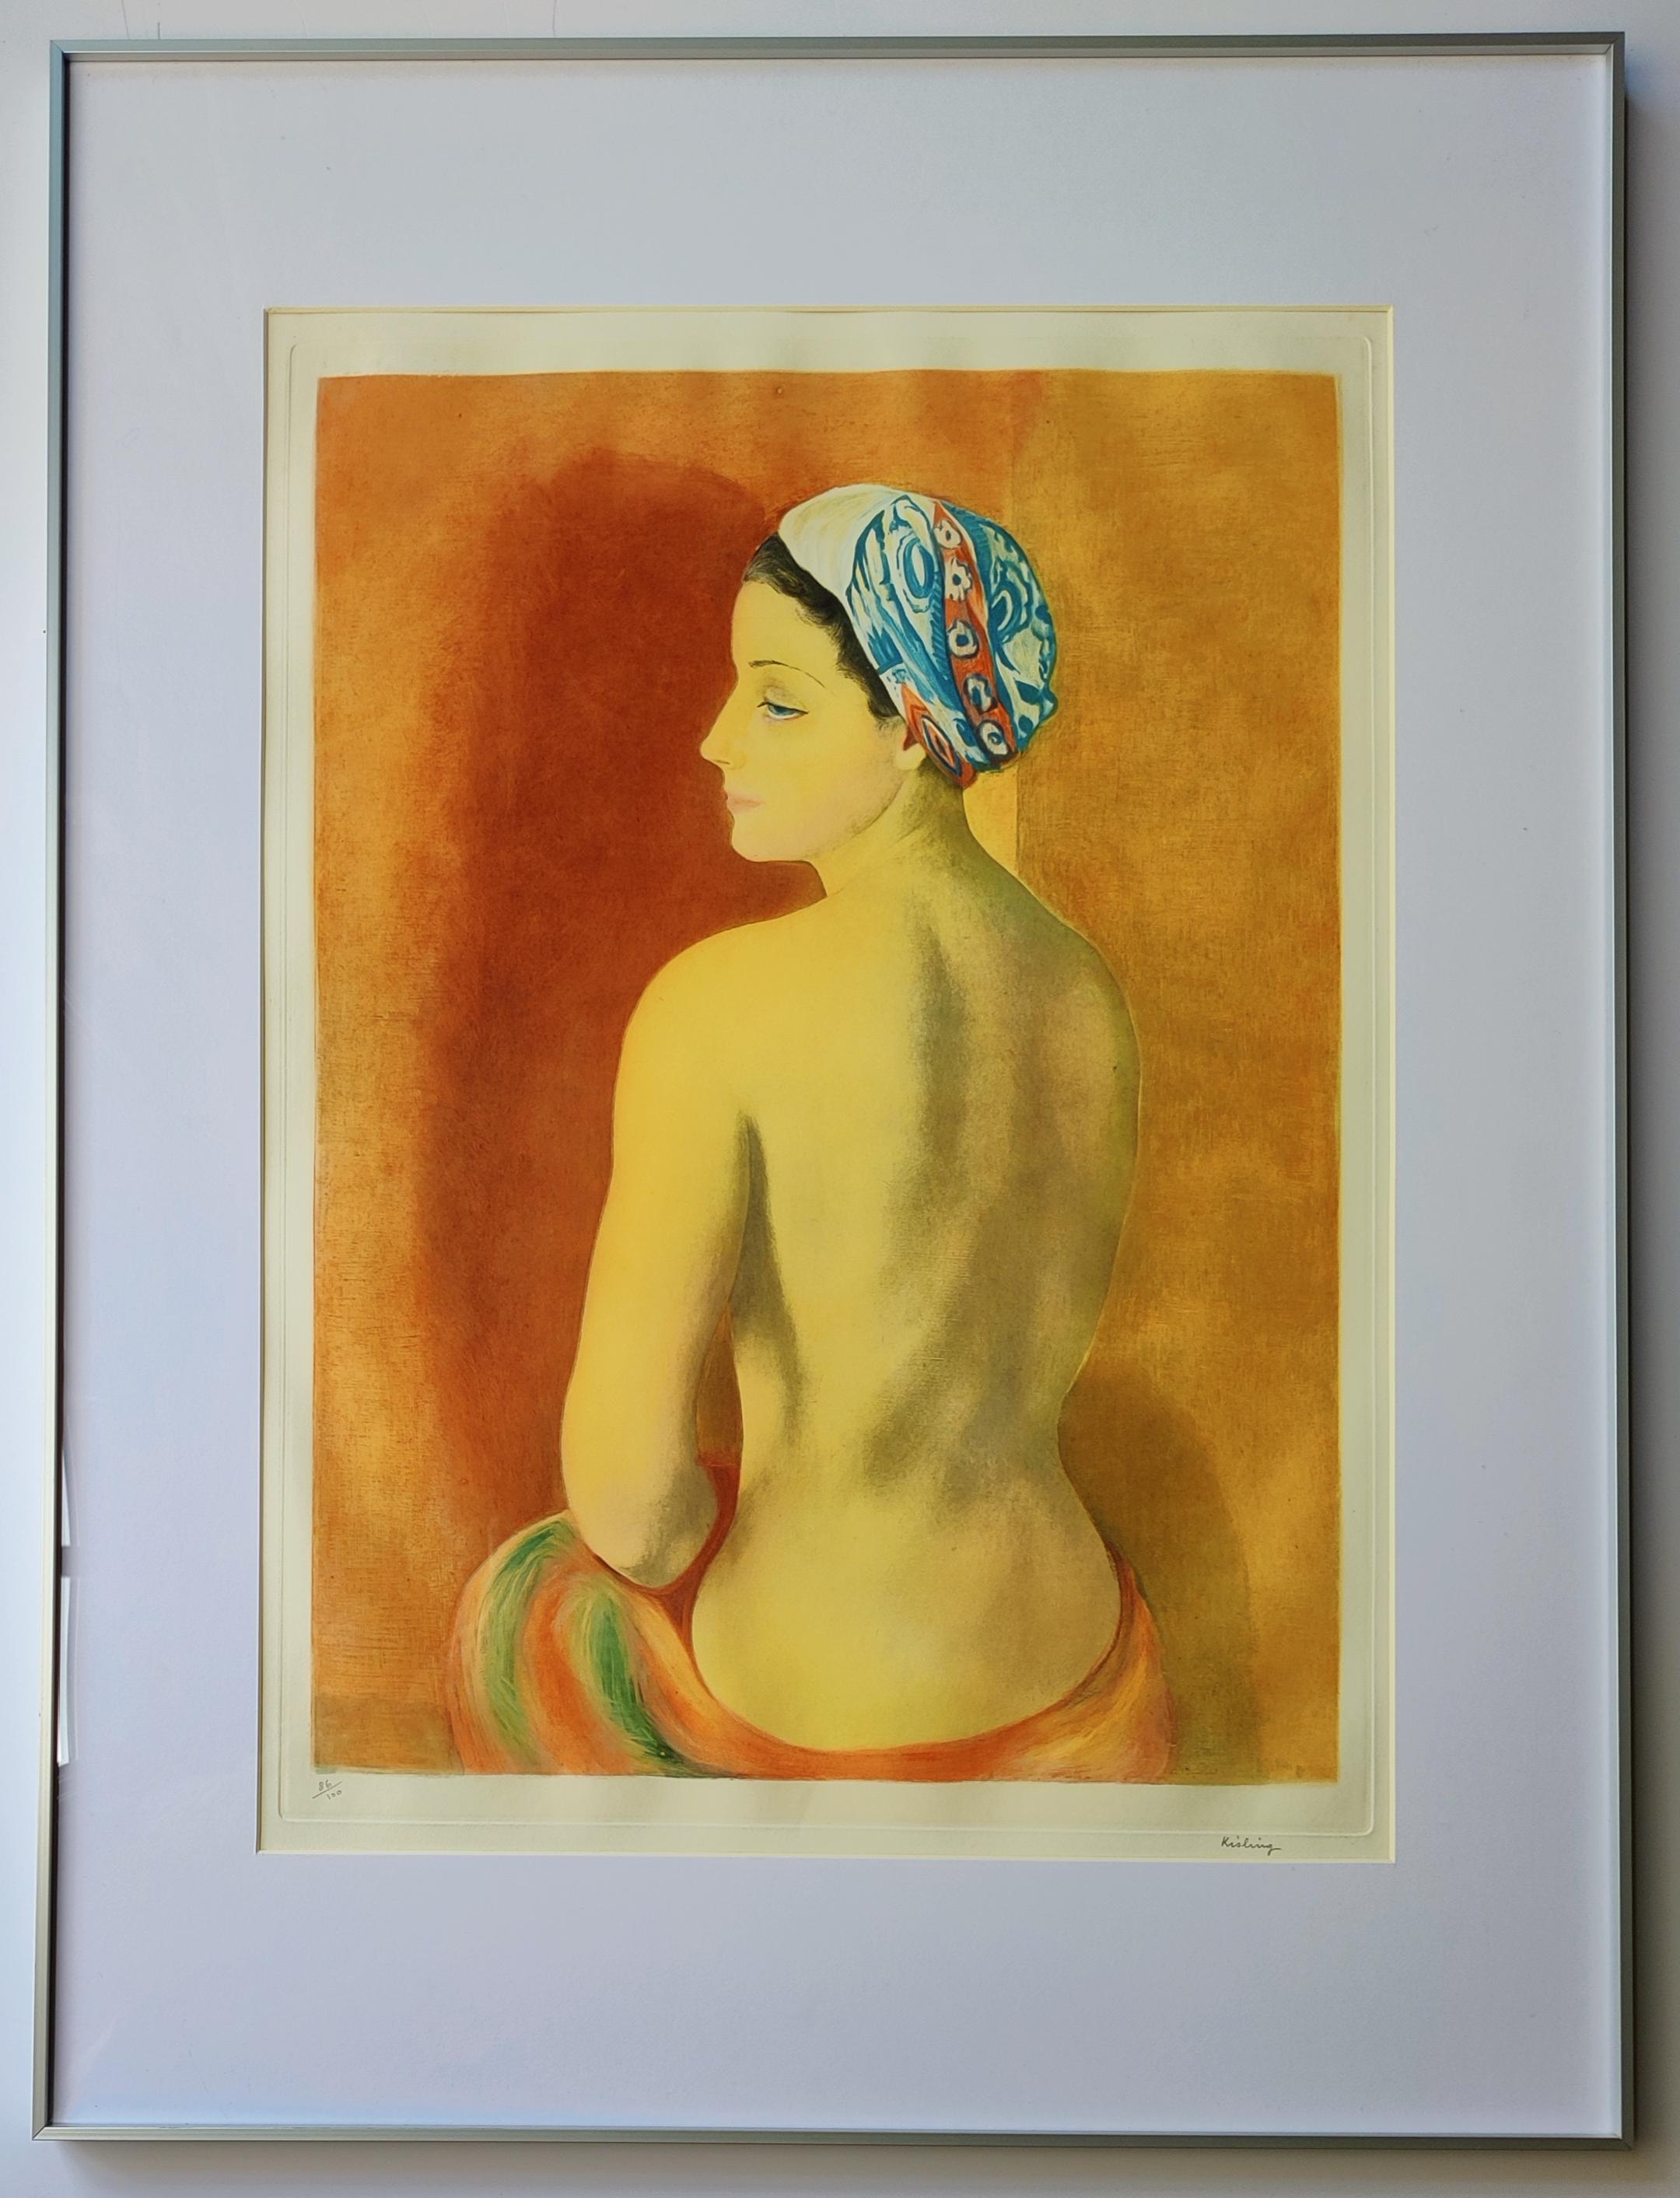 Moise Kisling 
NU AU TURBAN, 1952
Color aquatint
Signed low right
Numbered 86/100 low left
Image size 54 x 39.3 cm
Sheet size 75.2 x 55.7 cm
It is framed with the aluminium frame, the acid-free mat and the UV-protected acrylic glass 

